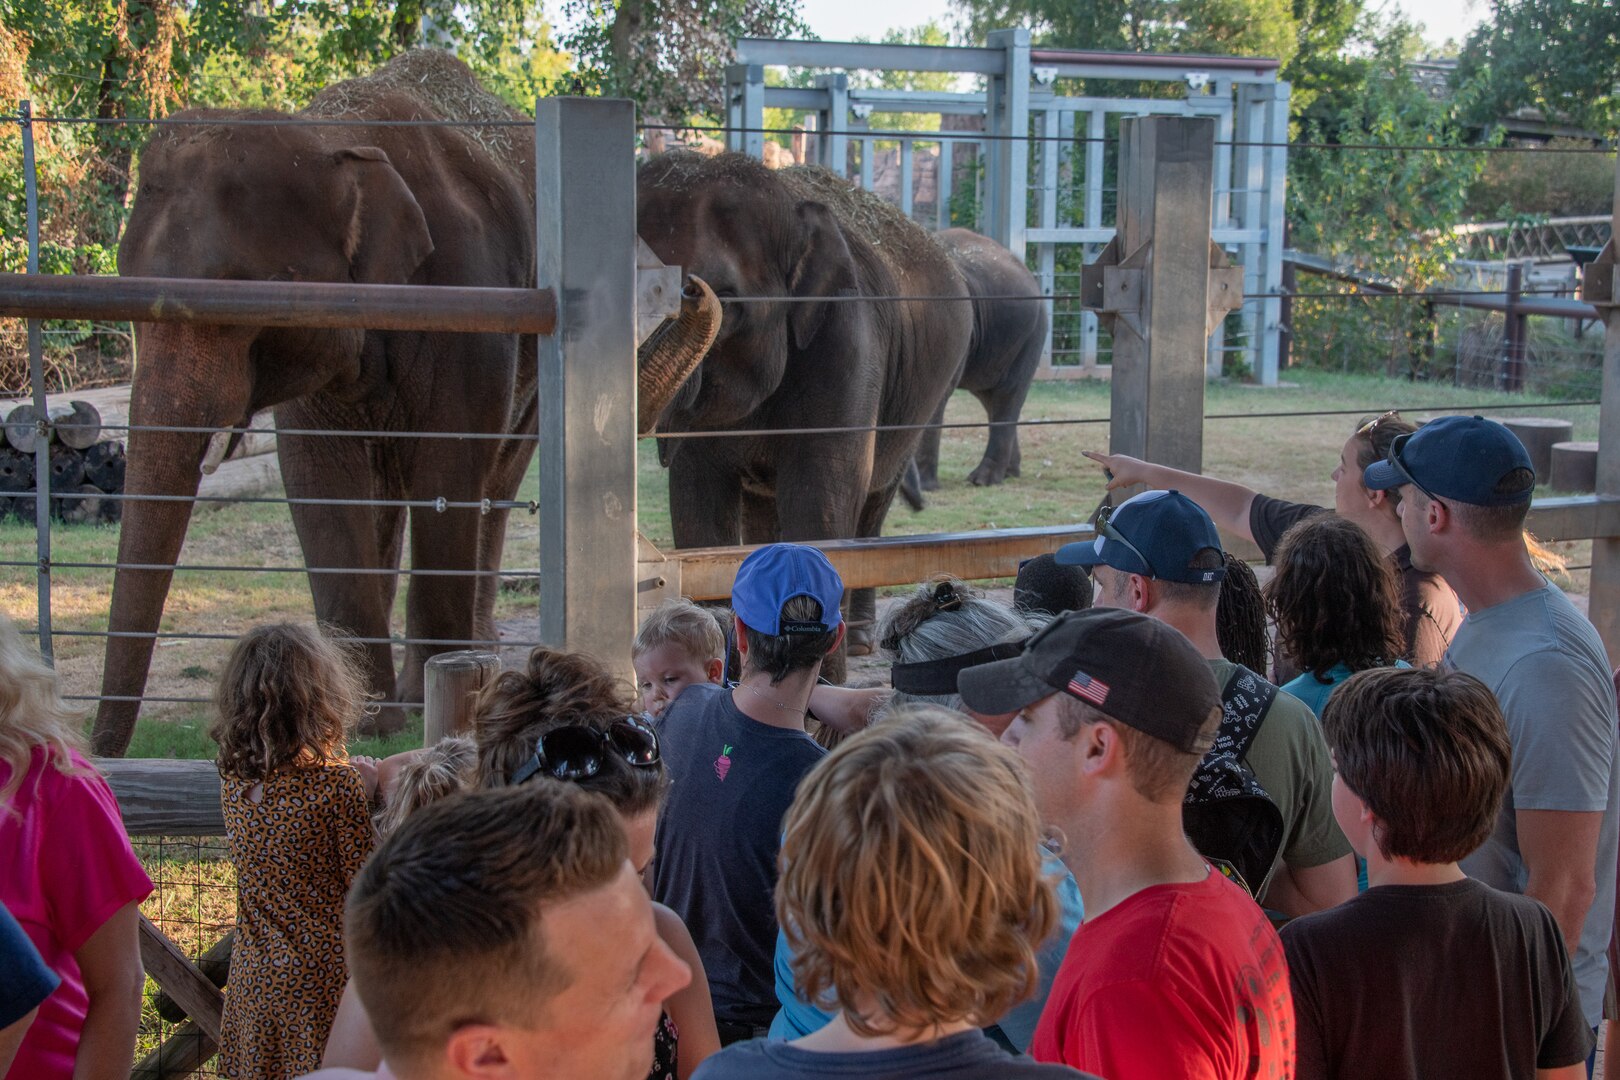 elephants are watched by a crowd